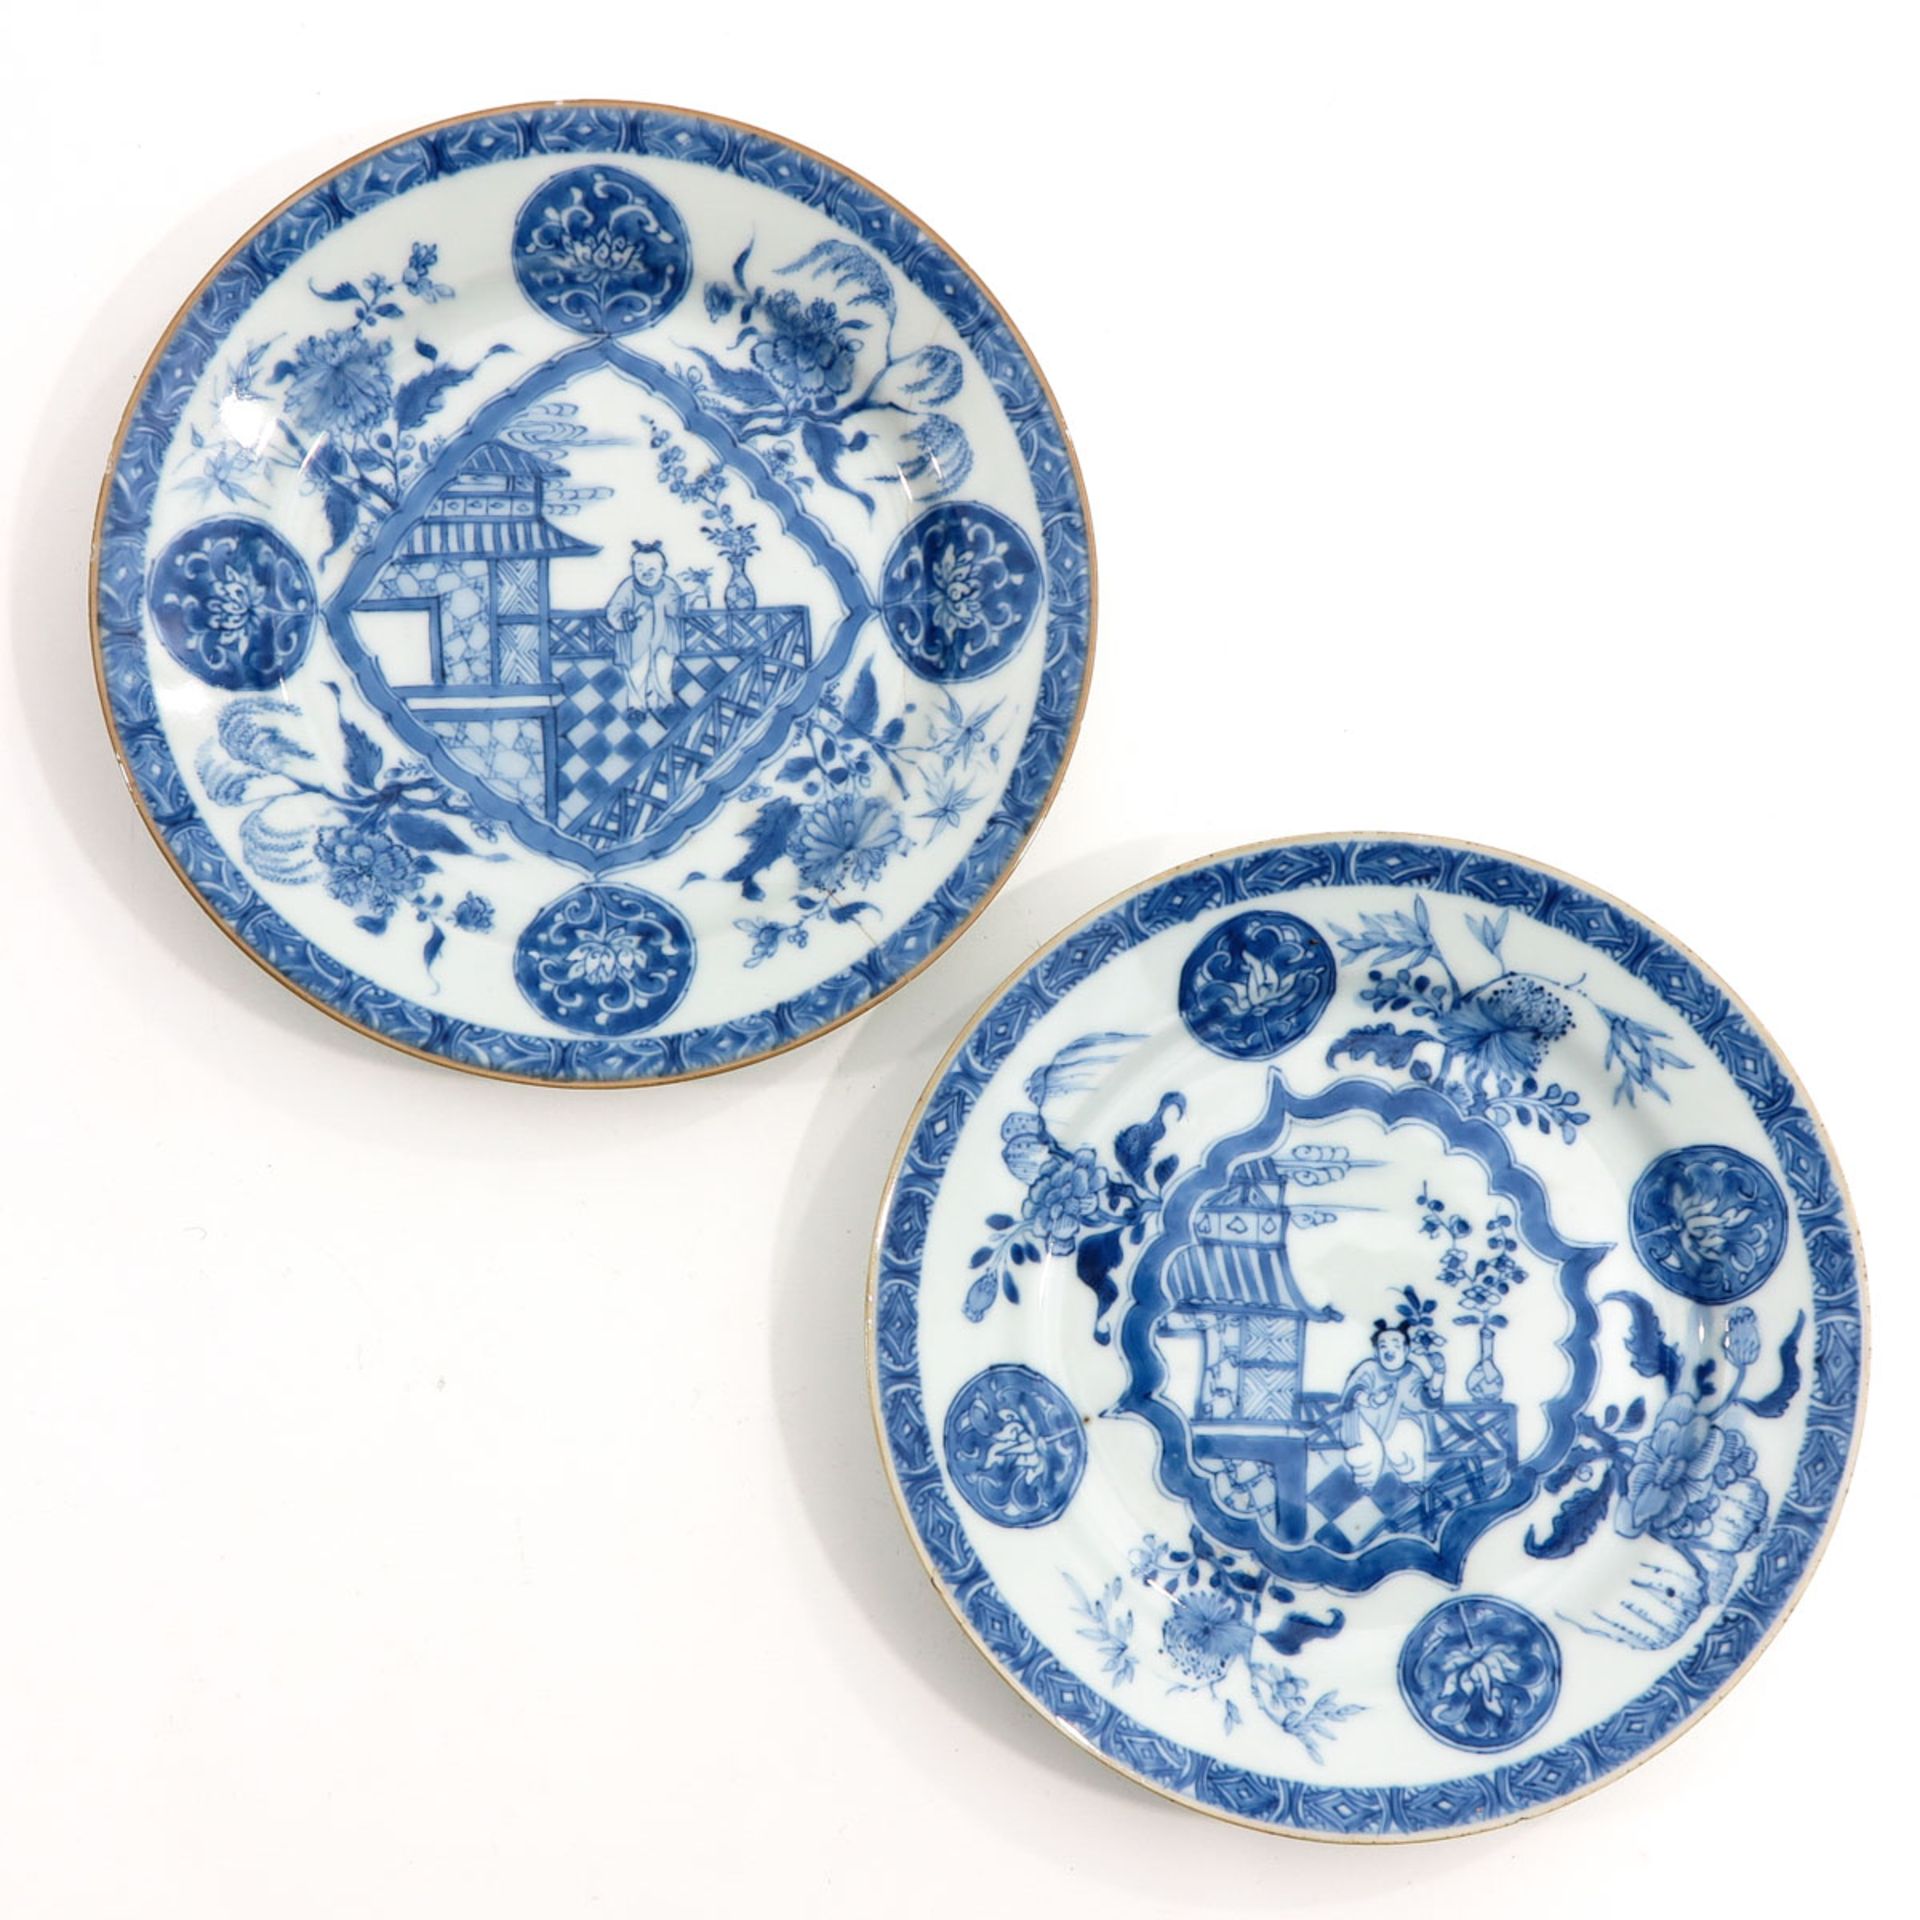 A Series of 4 Blue and white Plates - Image 3 of 9